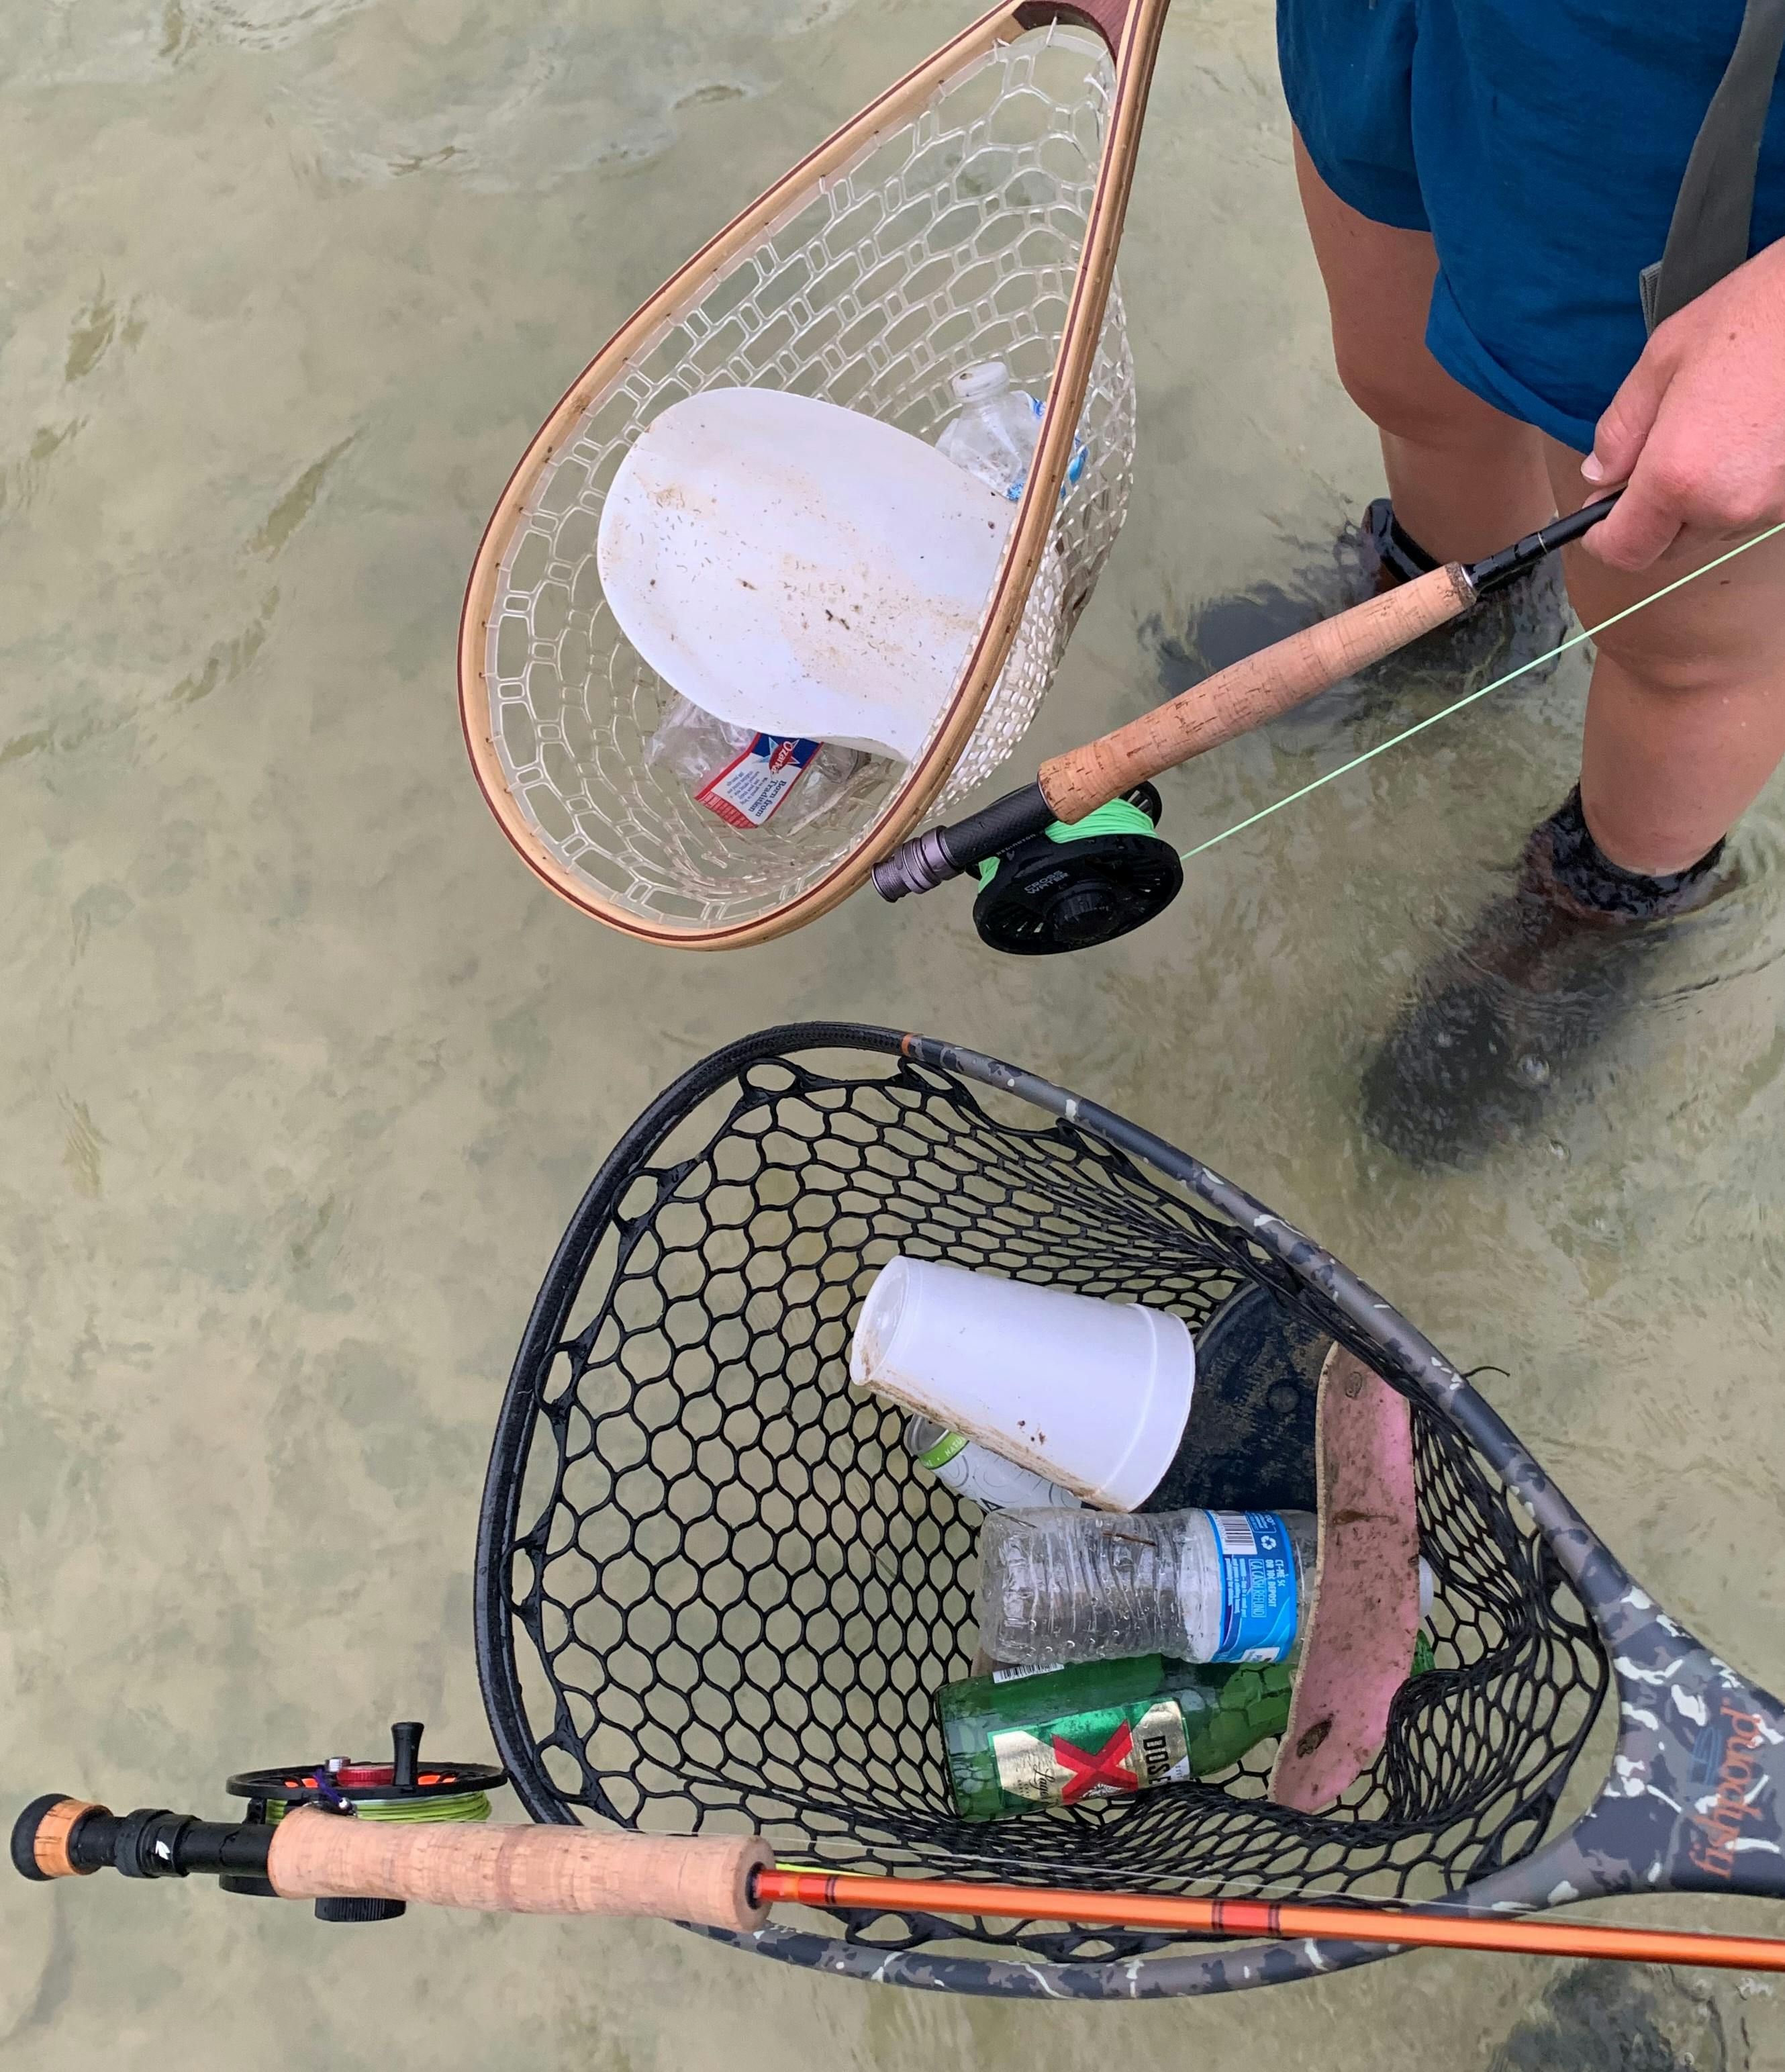 Two people carry nets filled with trash as they stand in the water. The image is taken from above, so we can see the trash in the nets, their rods in their hands, and their feet in the water.